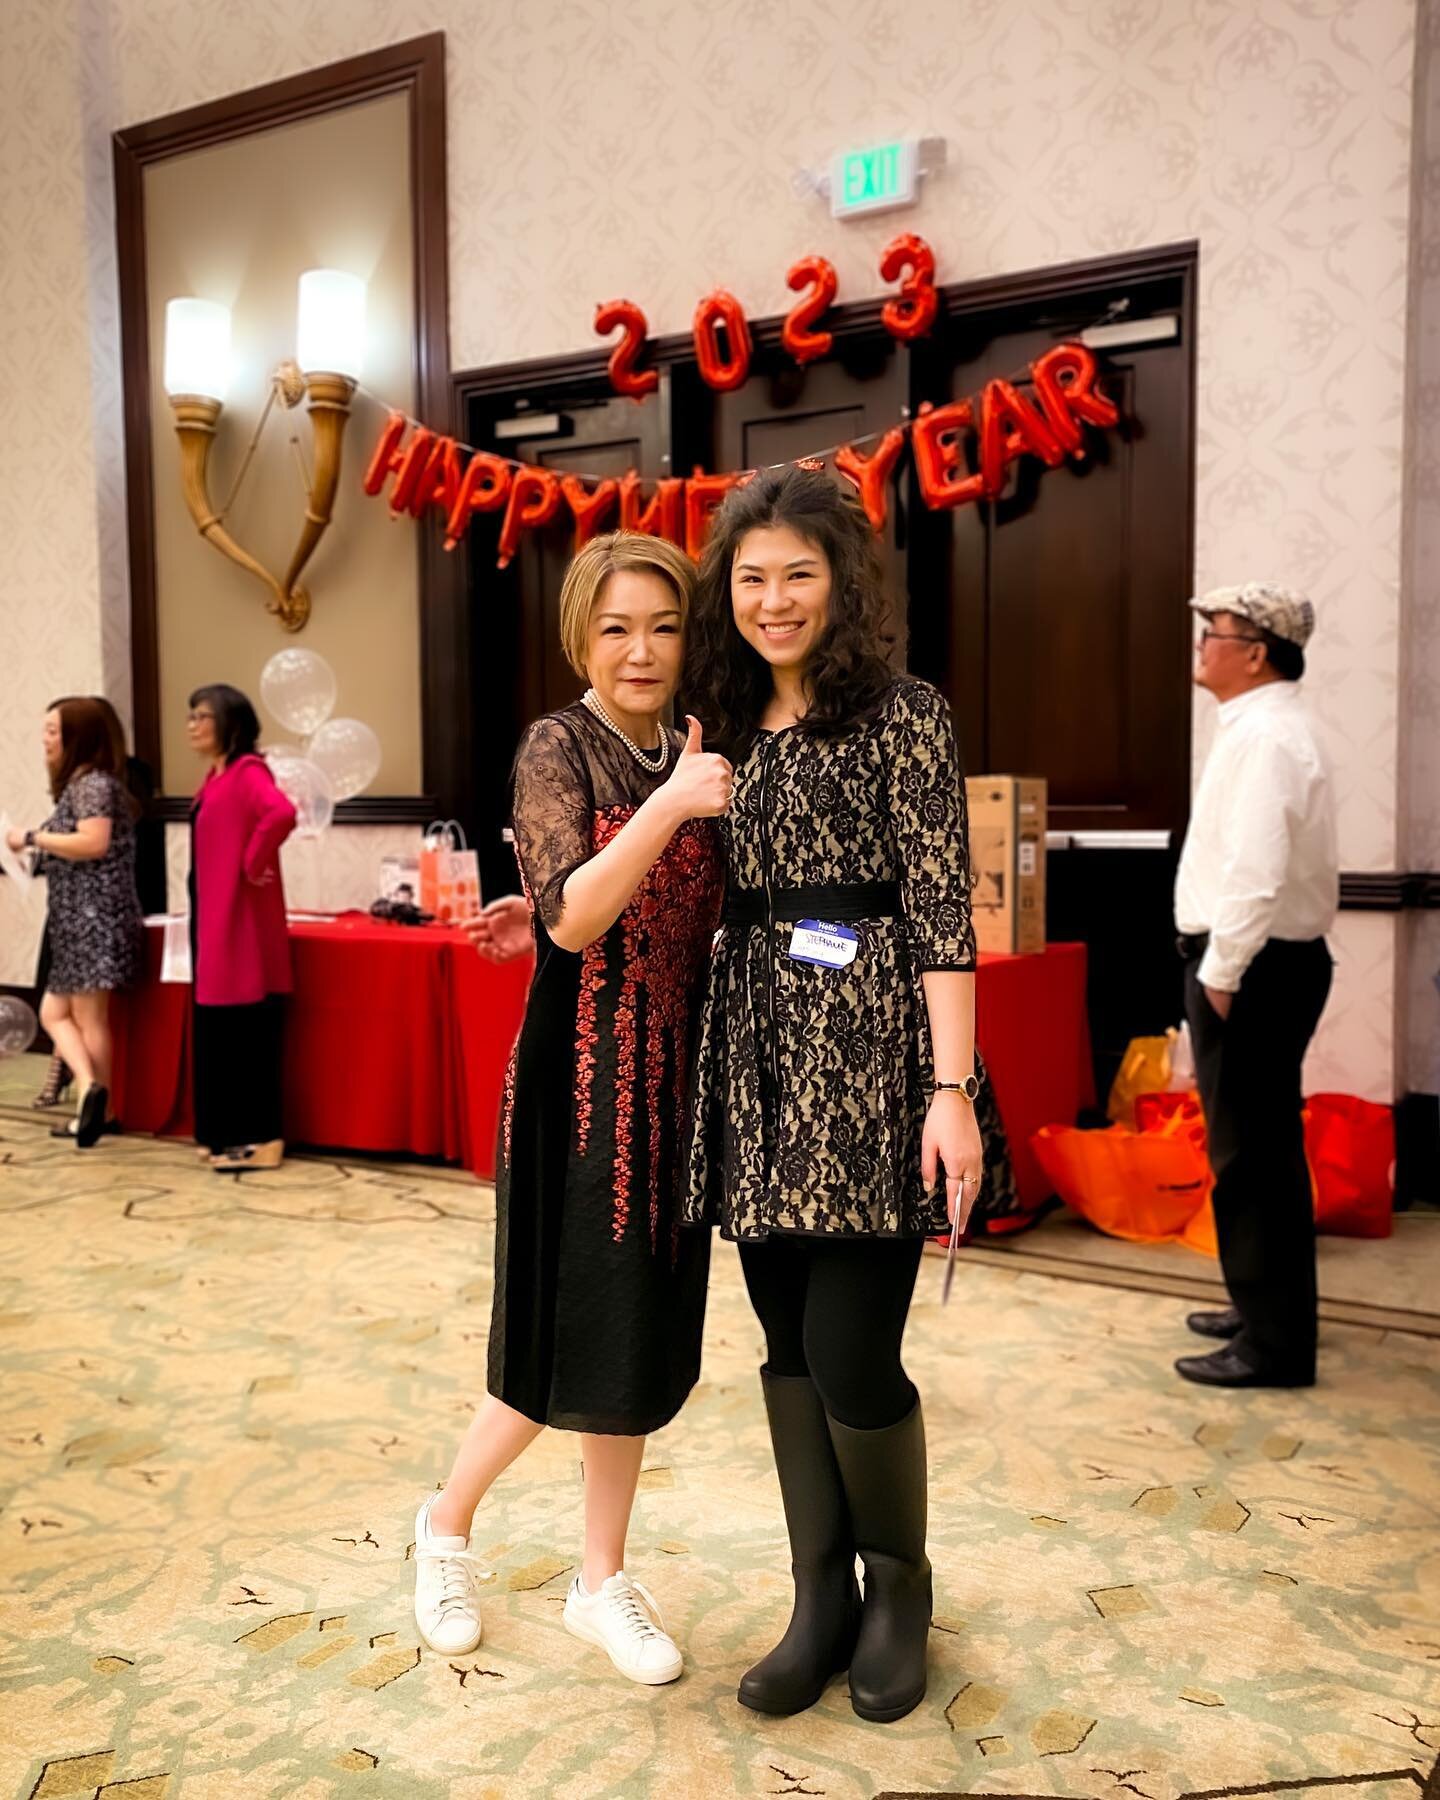 🎉 We hit 1K on YouTube! 

Here&rsquo;s a reel and a few pics from our Annual Gala to thank my wonderful boss Amanda and celebrate our continuing growth!

A little over a year ago I started working with Happy 50 Plus. It&rsquo;s a nonprofit organizat